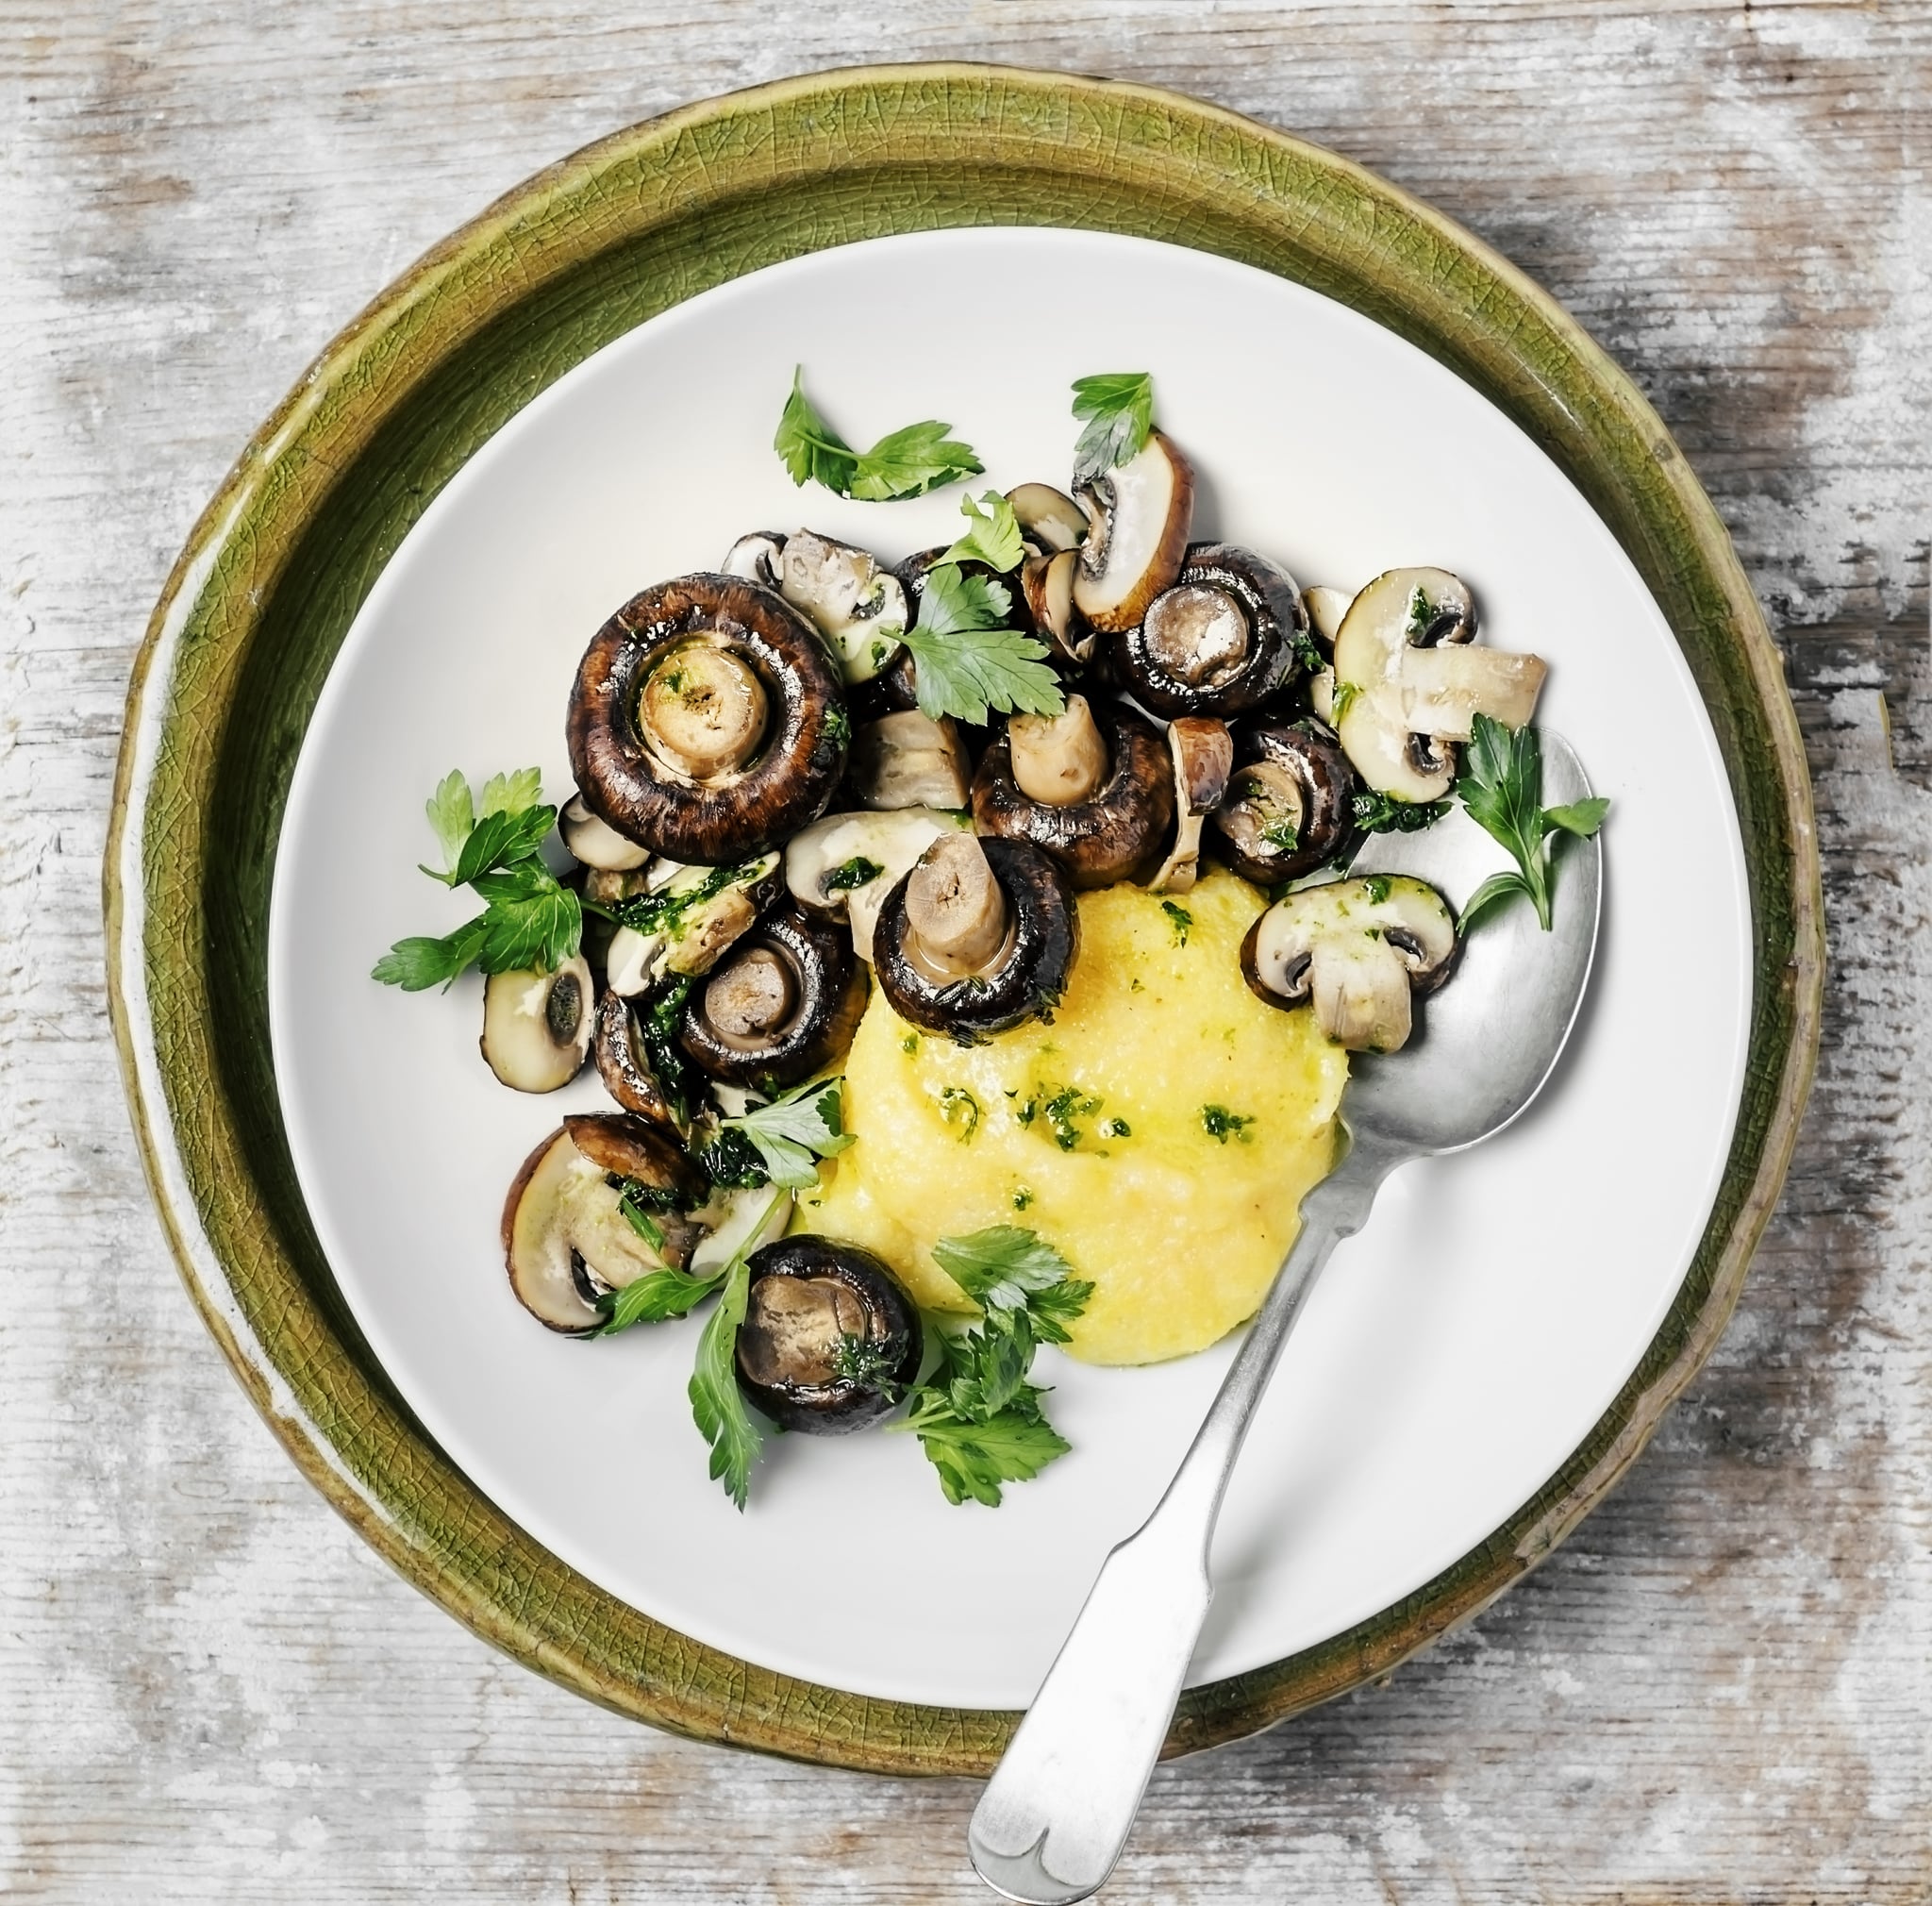 A plate of polenta with mushrooms on wooden background